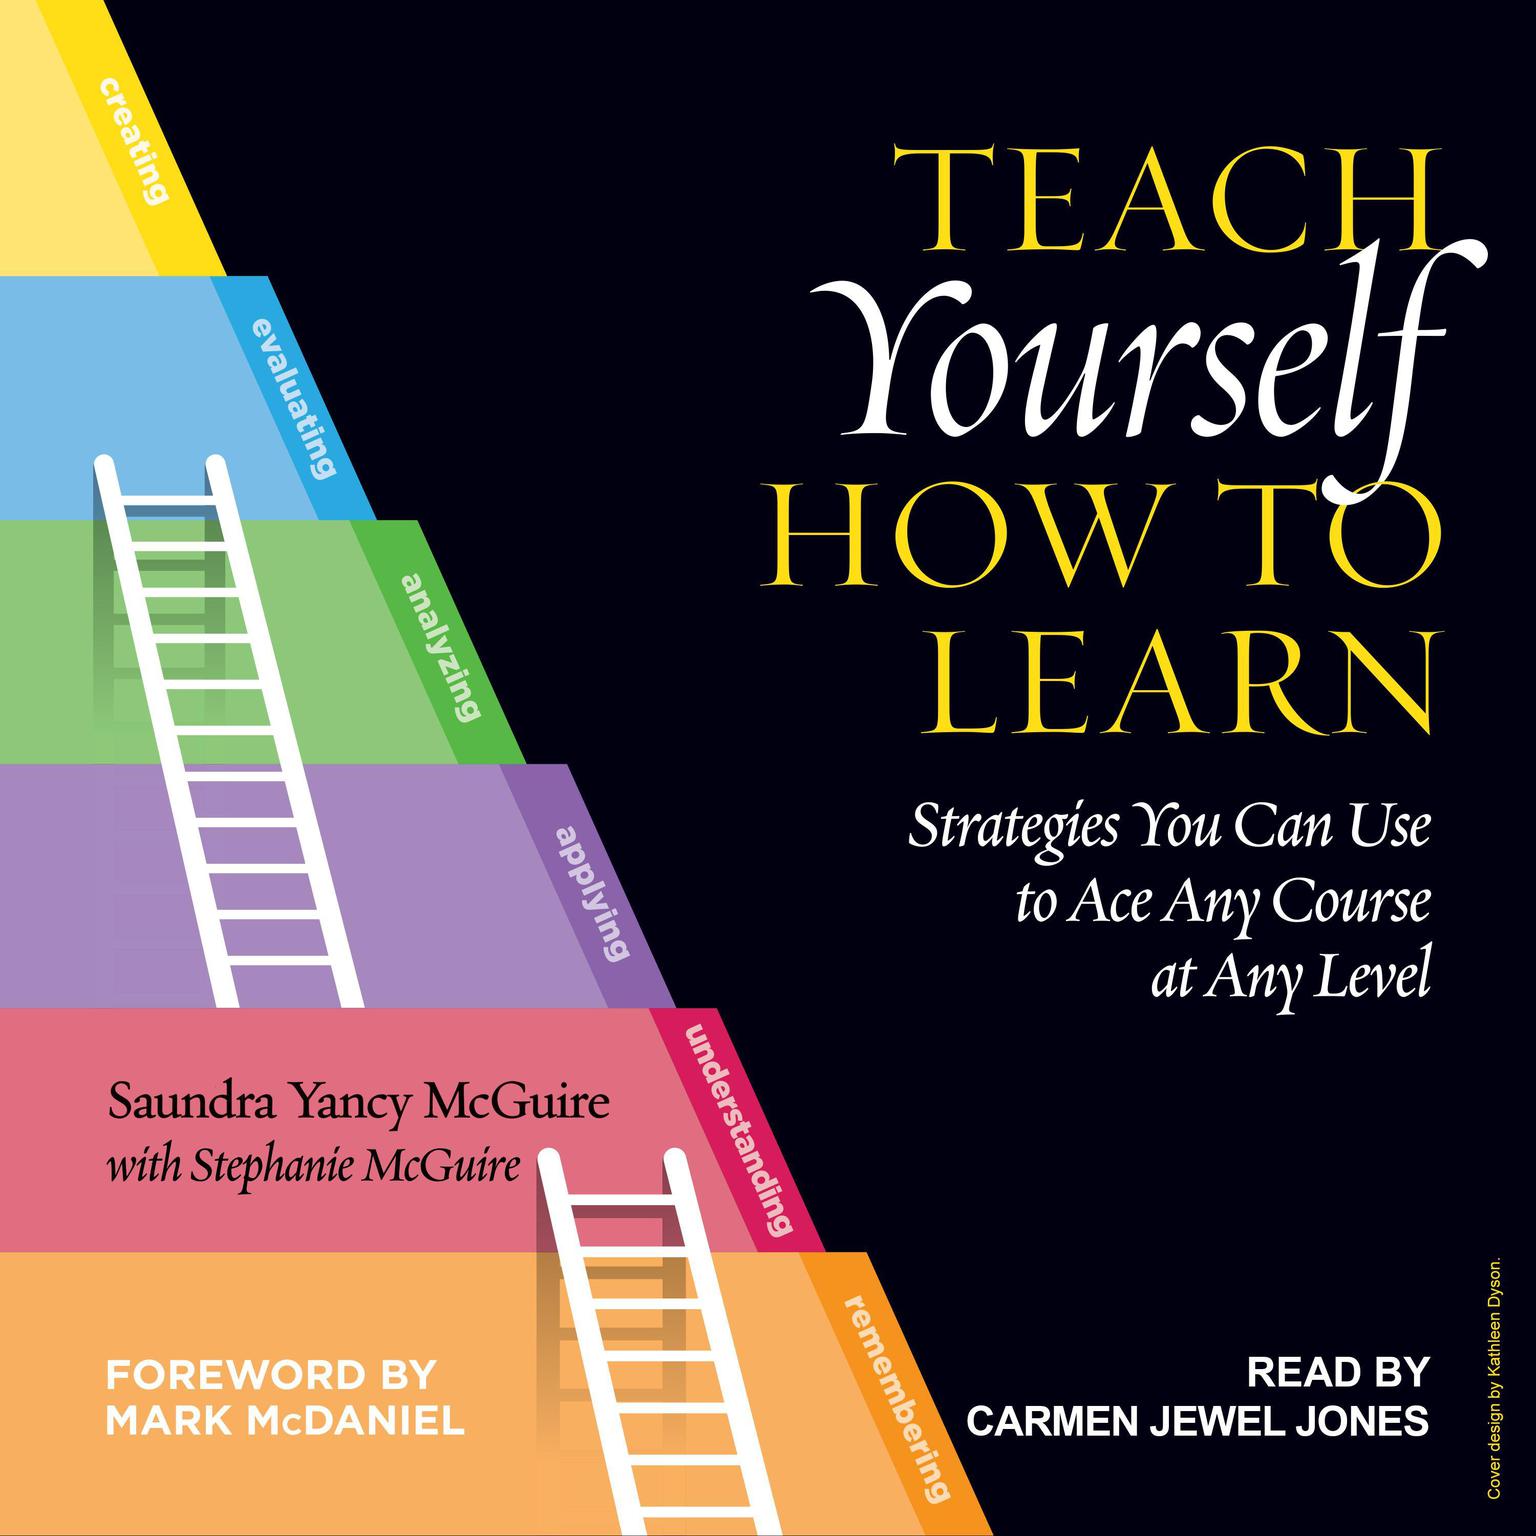 Teach Yourself How to Learn: Strategies You Can Use to Ace Any Course at Any Level Audiobook, by Saundra Yancy McGuire